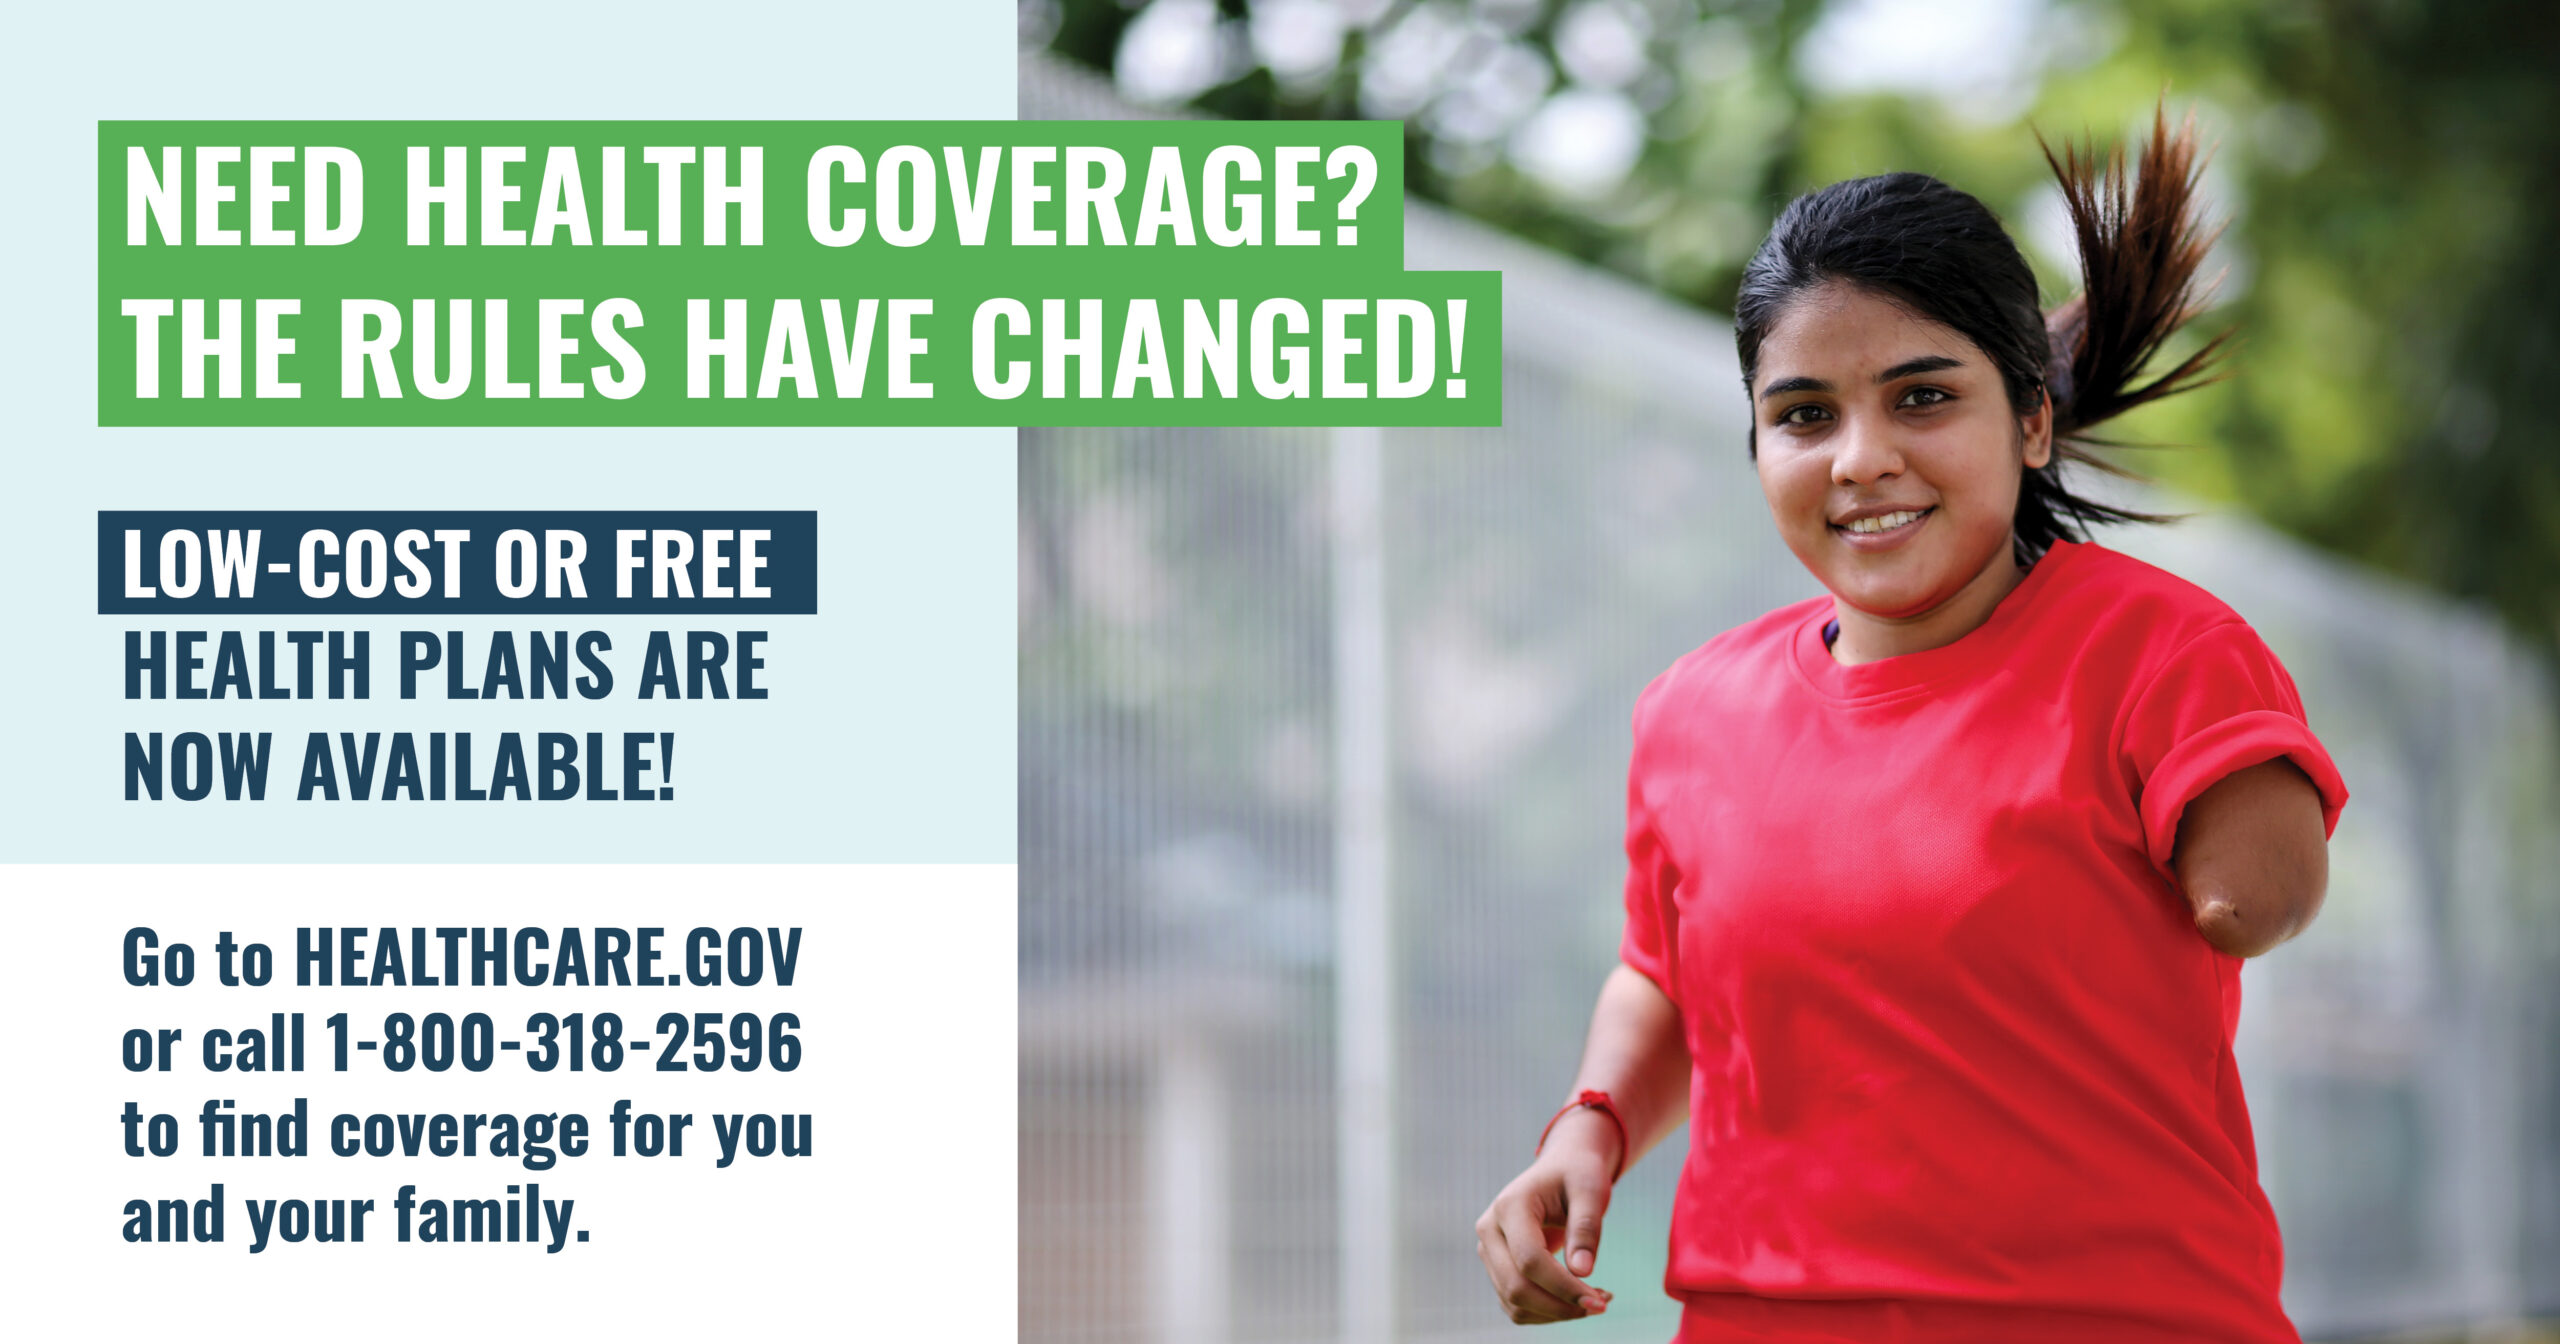 A young woman who is missing an arm is running with the message “Need health care coverage? The rules have changed! Low-cost or free health plans are now available! Go to healthcare.gov or call 1-800-318-2596 to find coverage for you and your family."